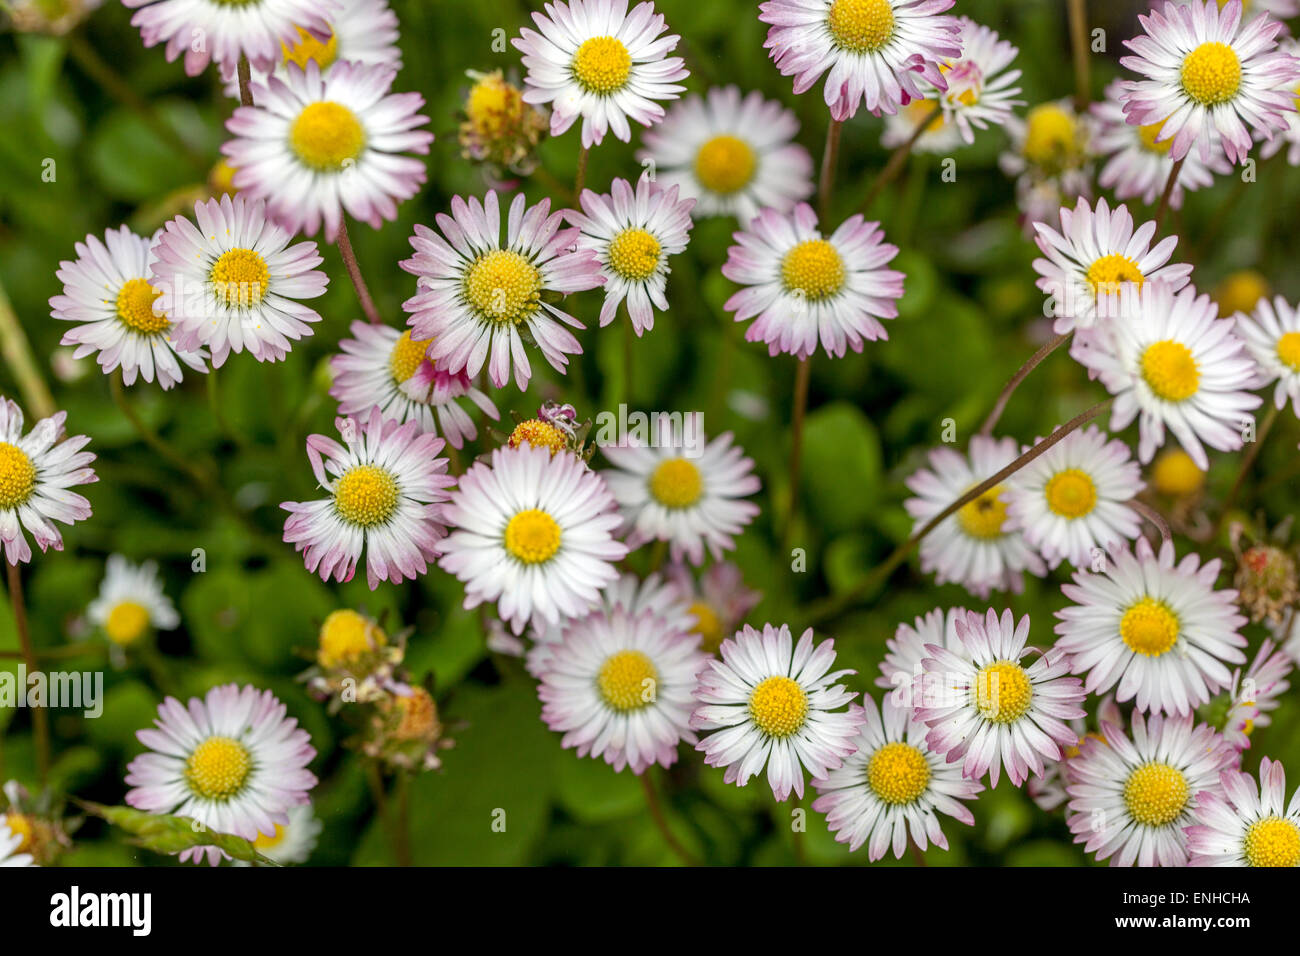 Common Daisies, Bellis perennis Lawn daisy bunch of daisies growing Stock Photo